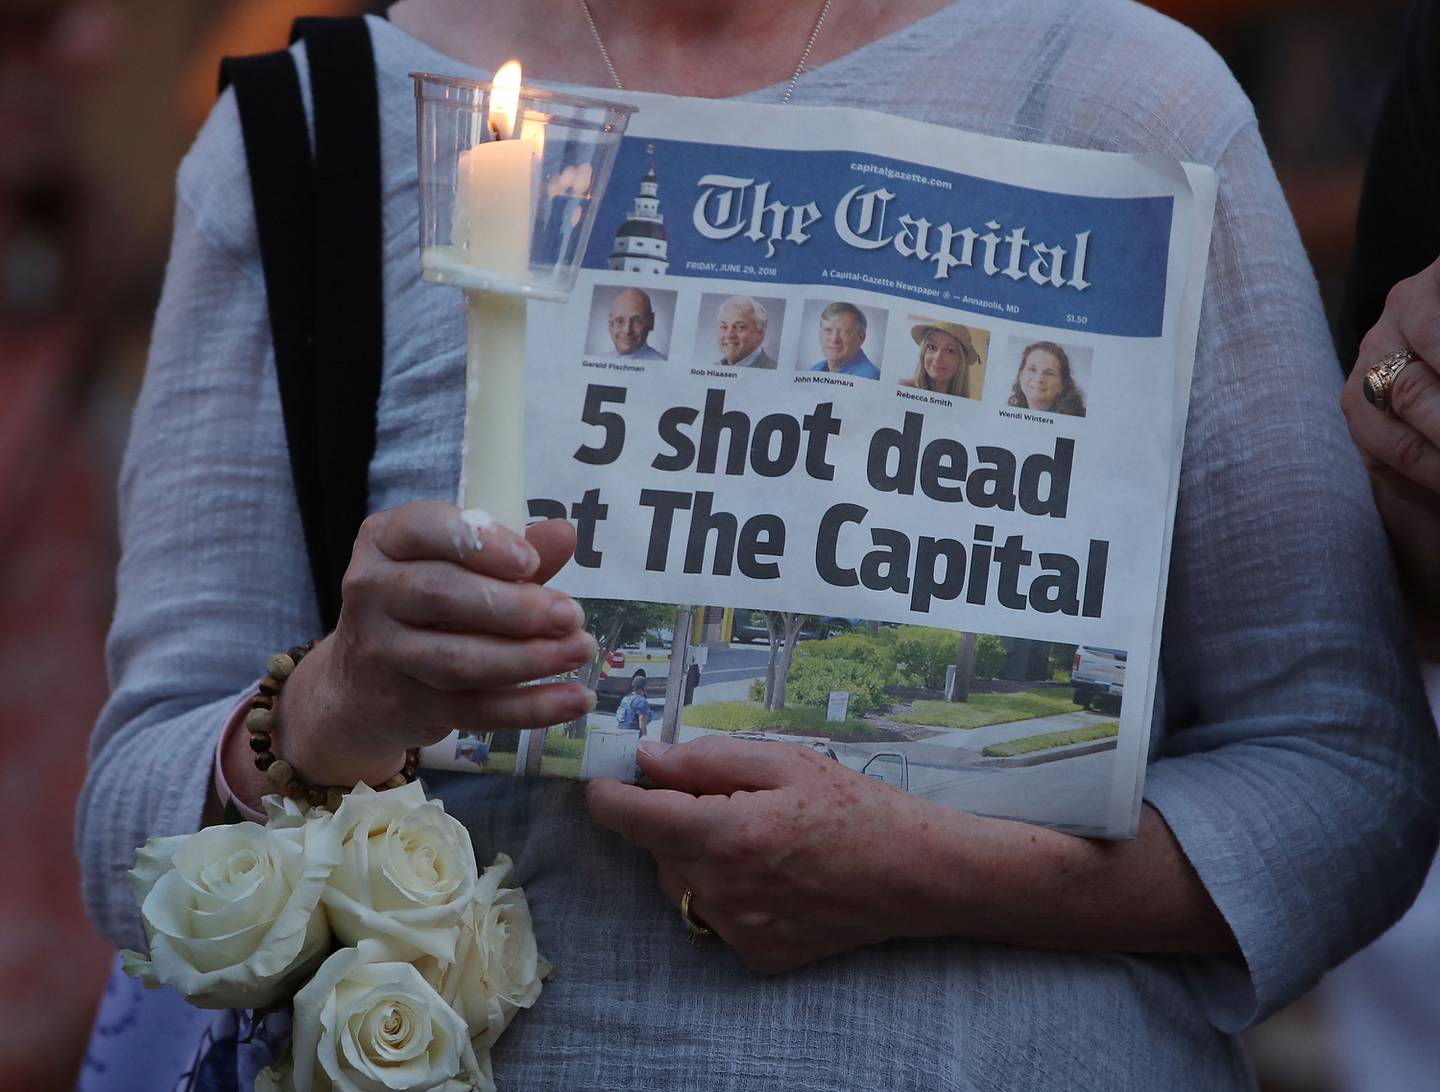 ANNAPOLIS - A women holds an edition of the Capital Gazette newspaper during a candlelight vigil to honor the five people who were shot and killed on June 29, 2018 in Annapolis.